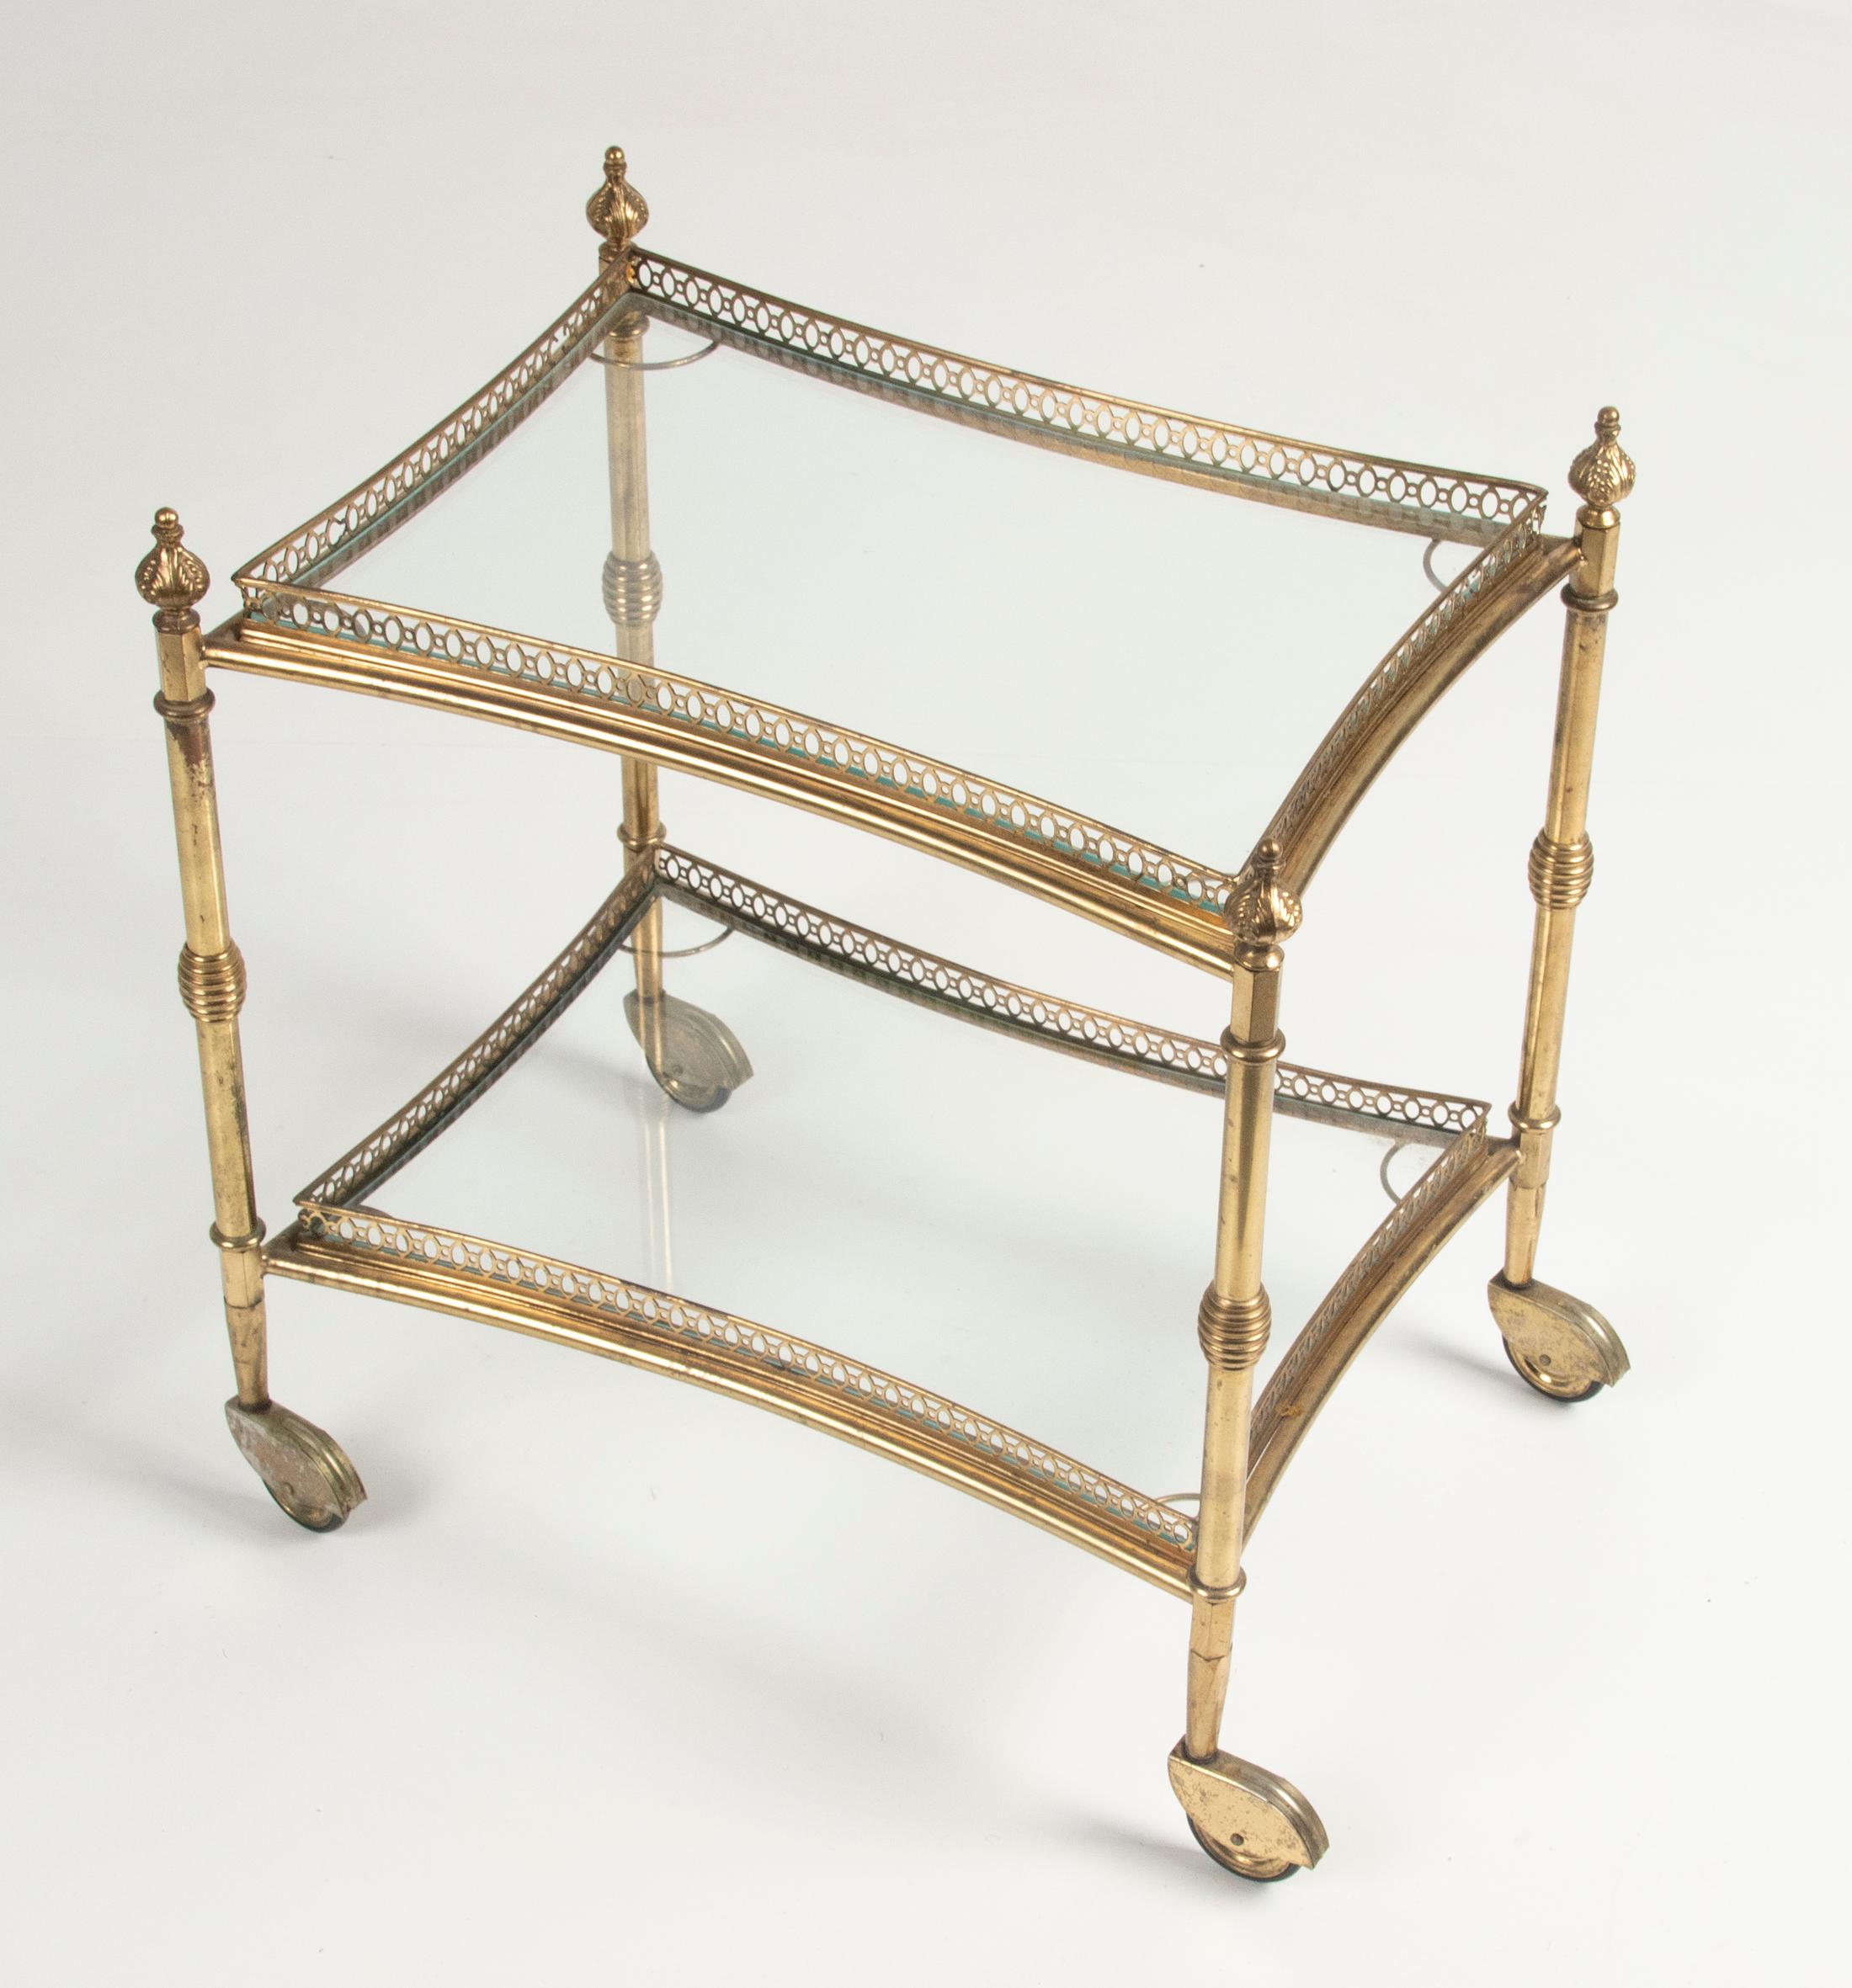 A copper mid century bar cart. The trolley has two levels of glass. The trolley have a copper cut-out raised edge. The copper swivel wheels have a little wear on the copper. It's made in France, around 1960-1970. The cart can be disassembled and can